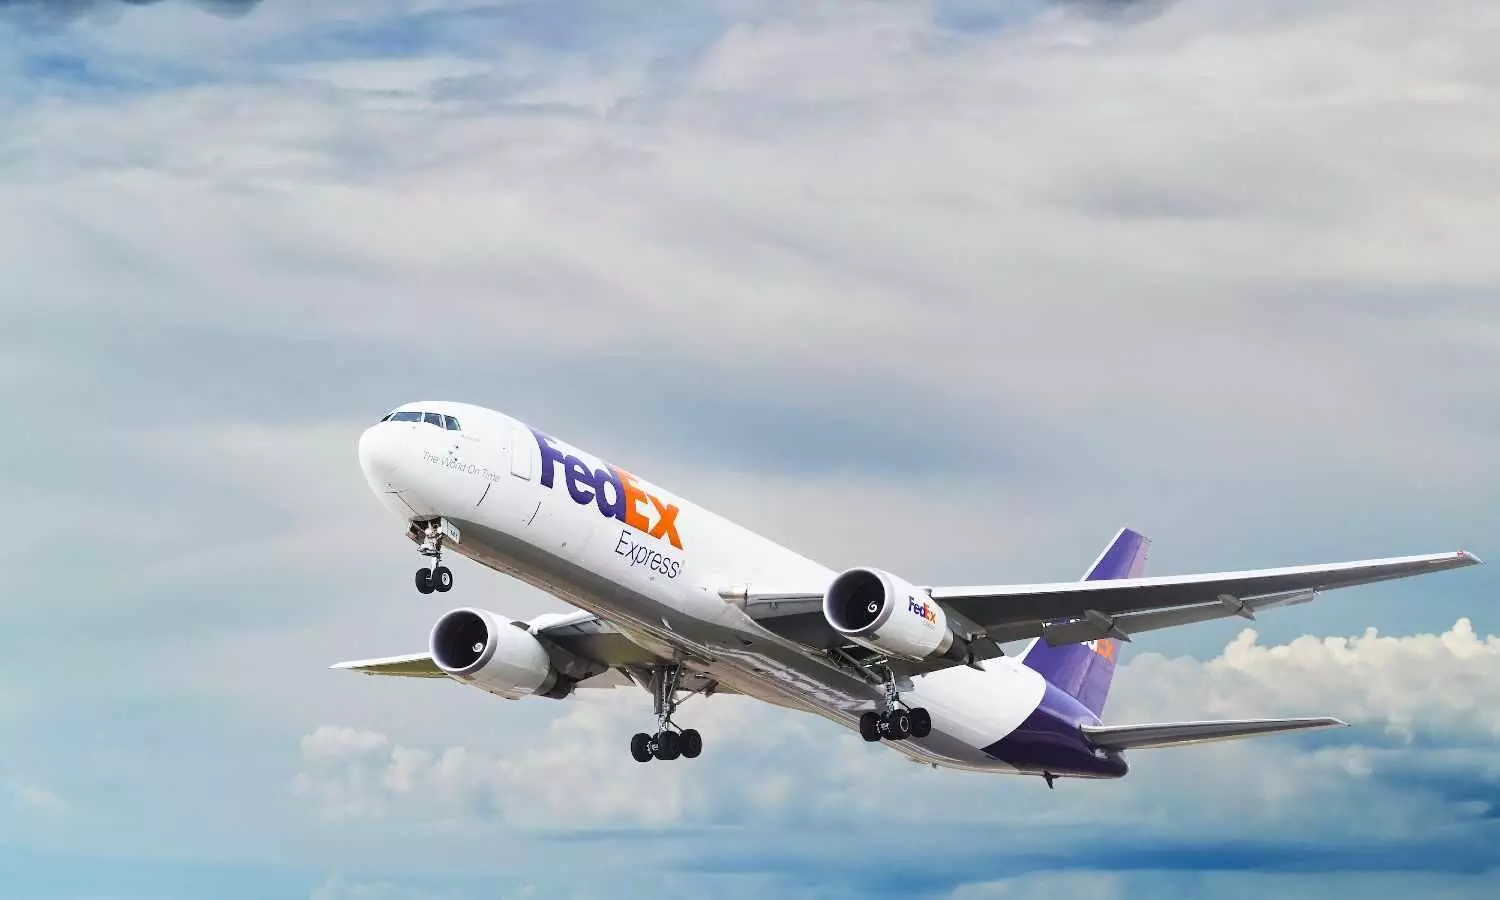 This new route also provides a direct link between FedEx Charles de Gaulle (CDG) Hub and Singapore one day per week